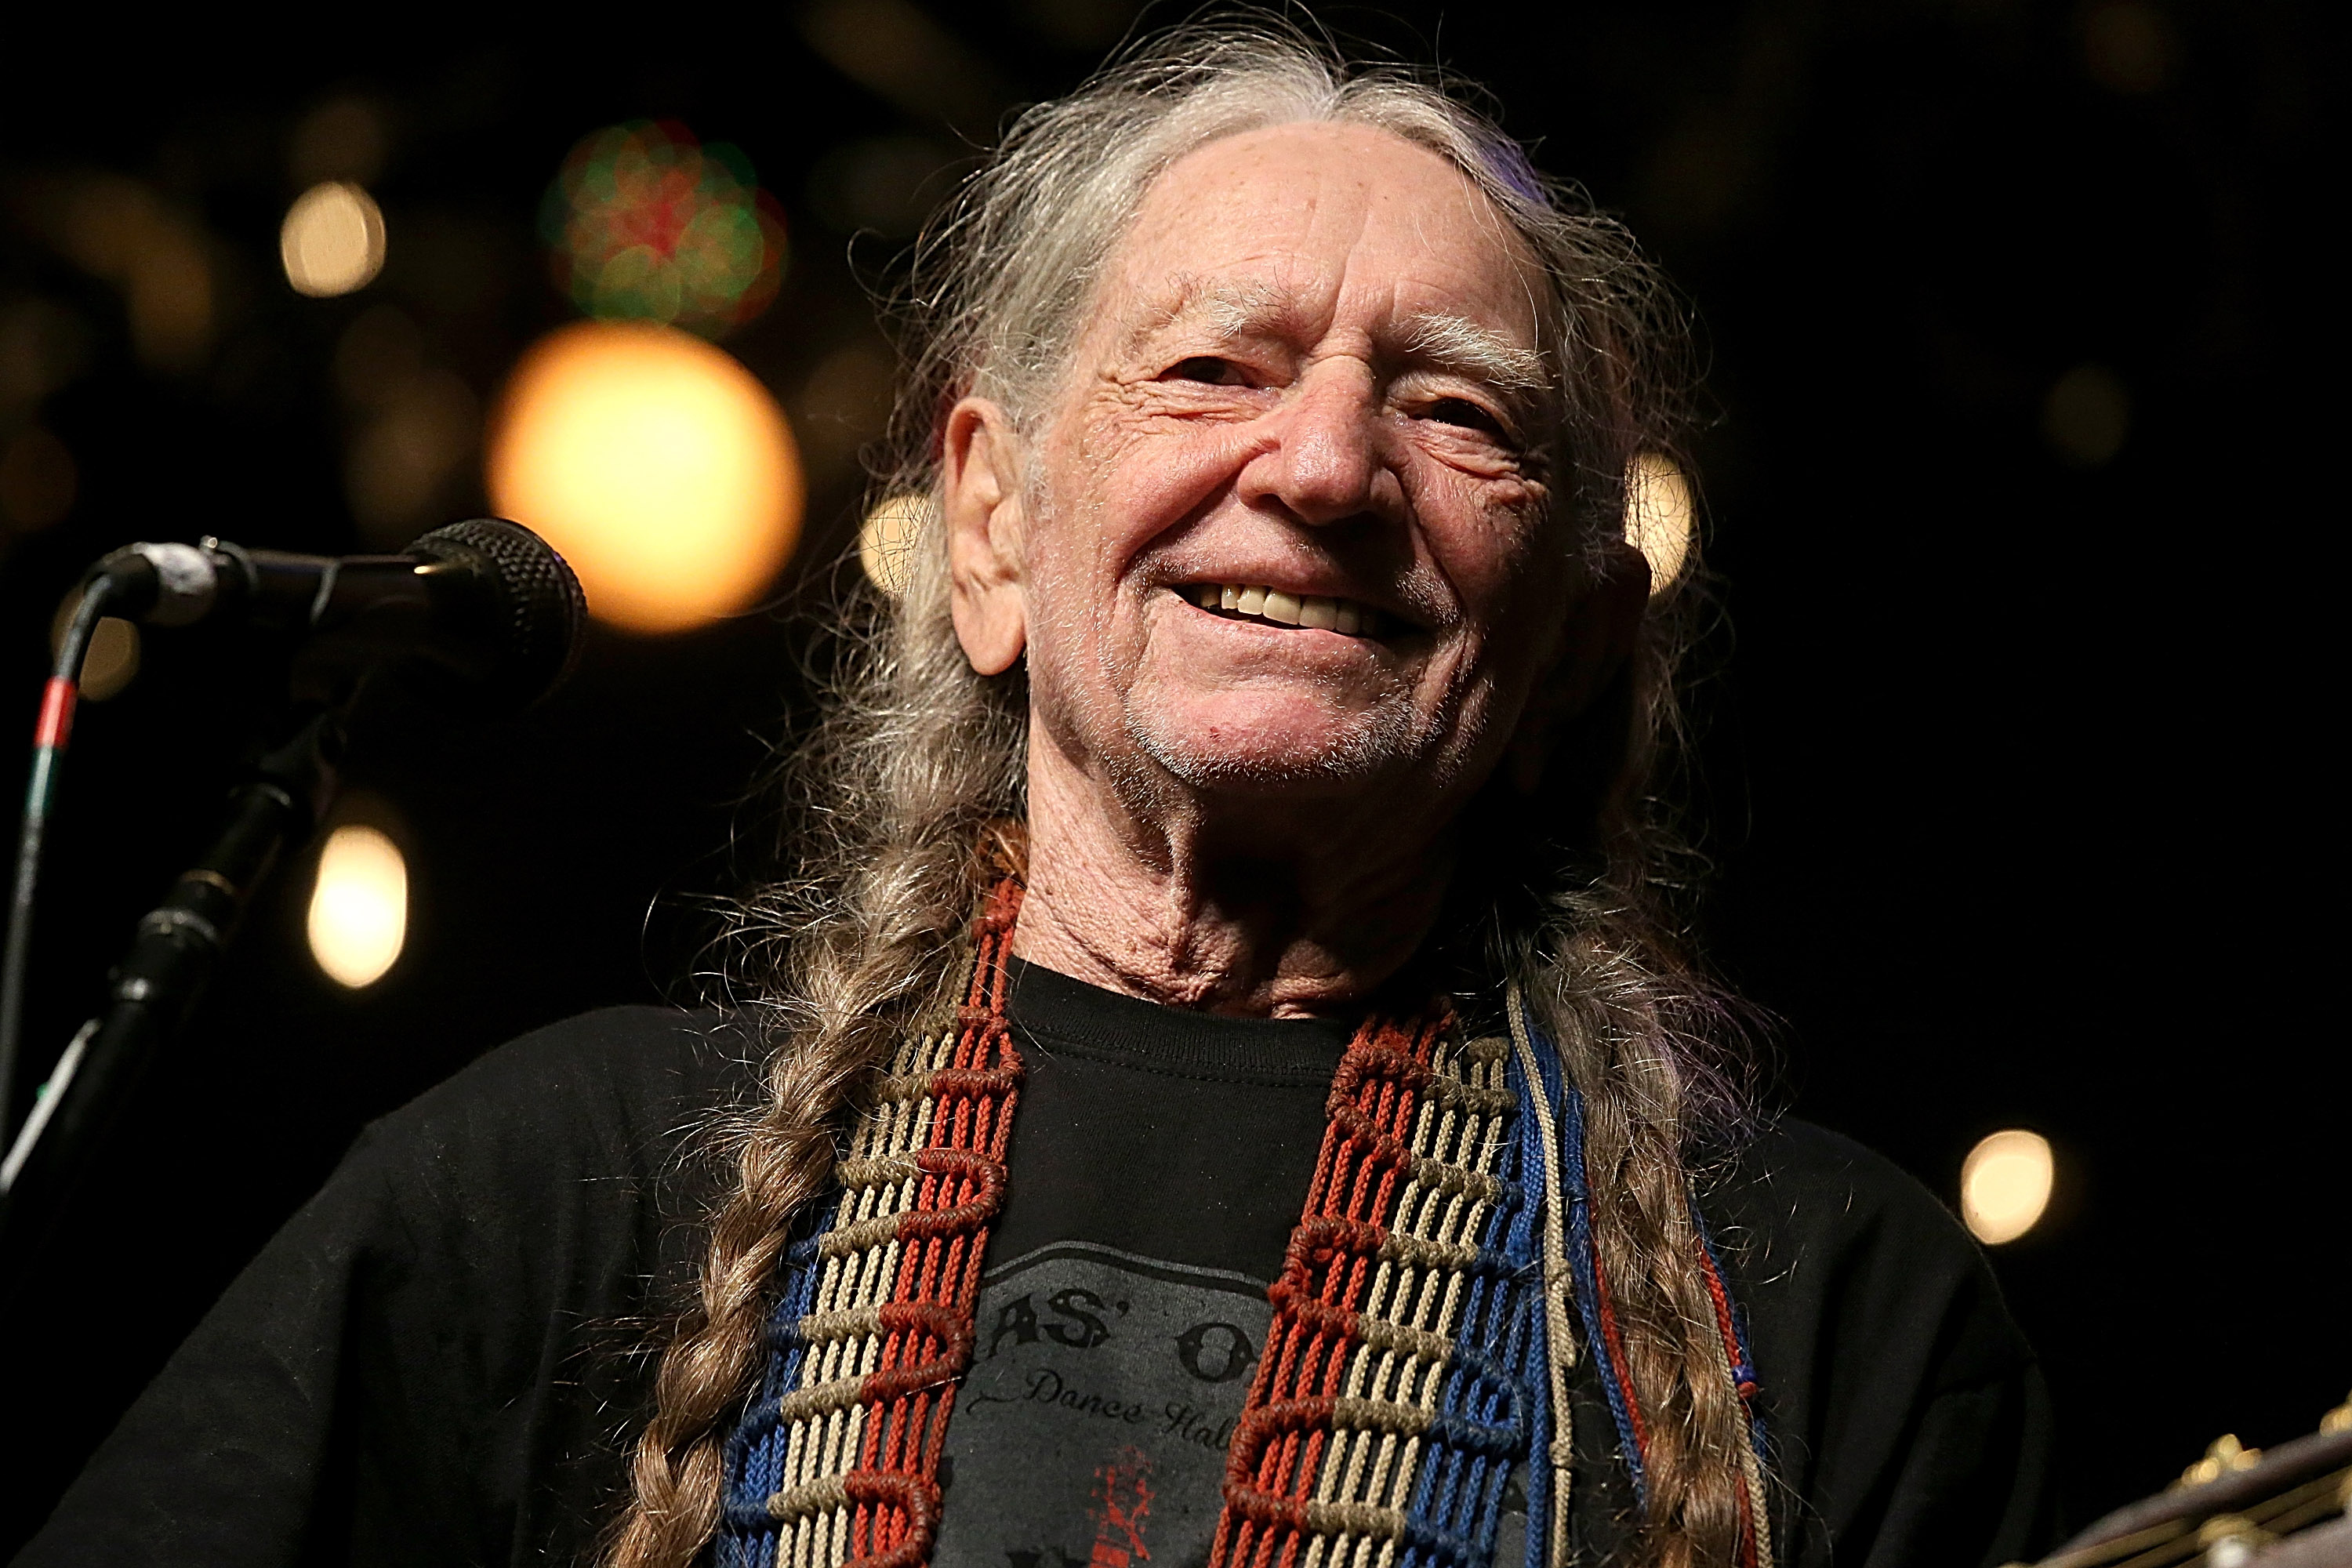 Willie Nelson performs in concert during the Heartbreaker Banquet on March 19, 2015 in Luck, Texas (Gary Miller—Getty Images)